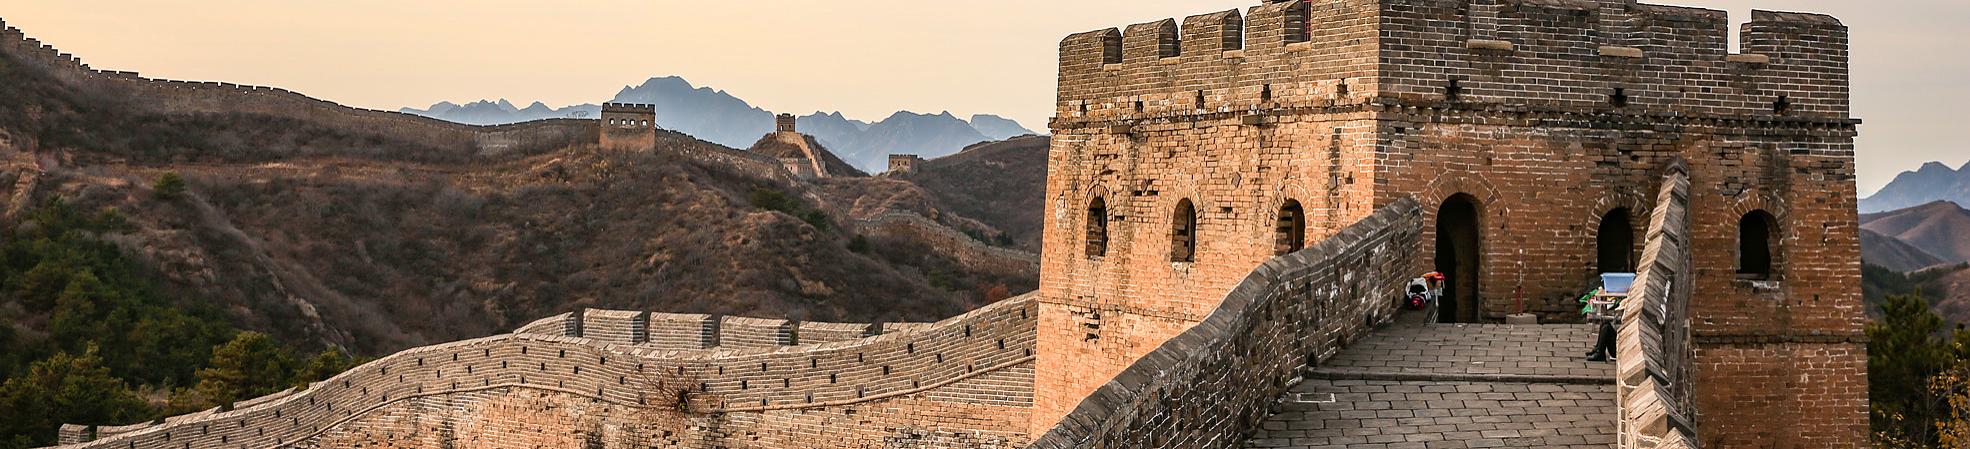 10 Unexpected Fun Facts About the Great Wall of China